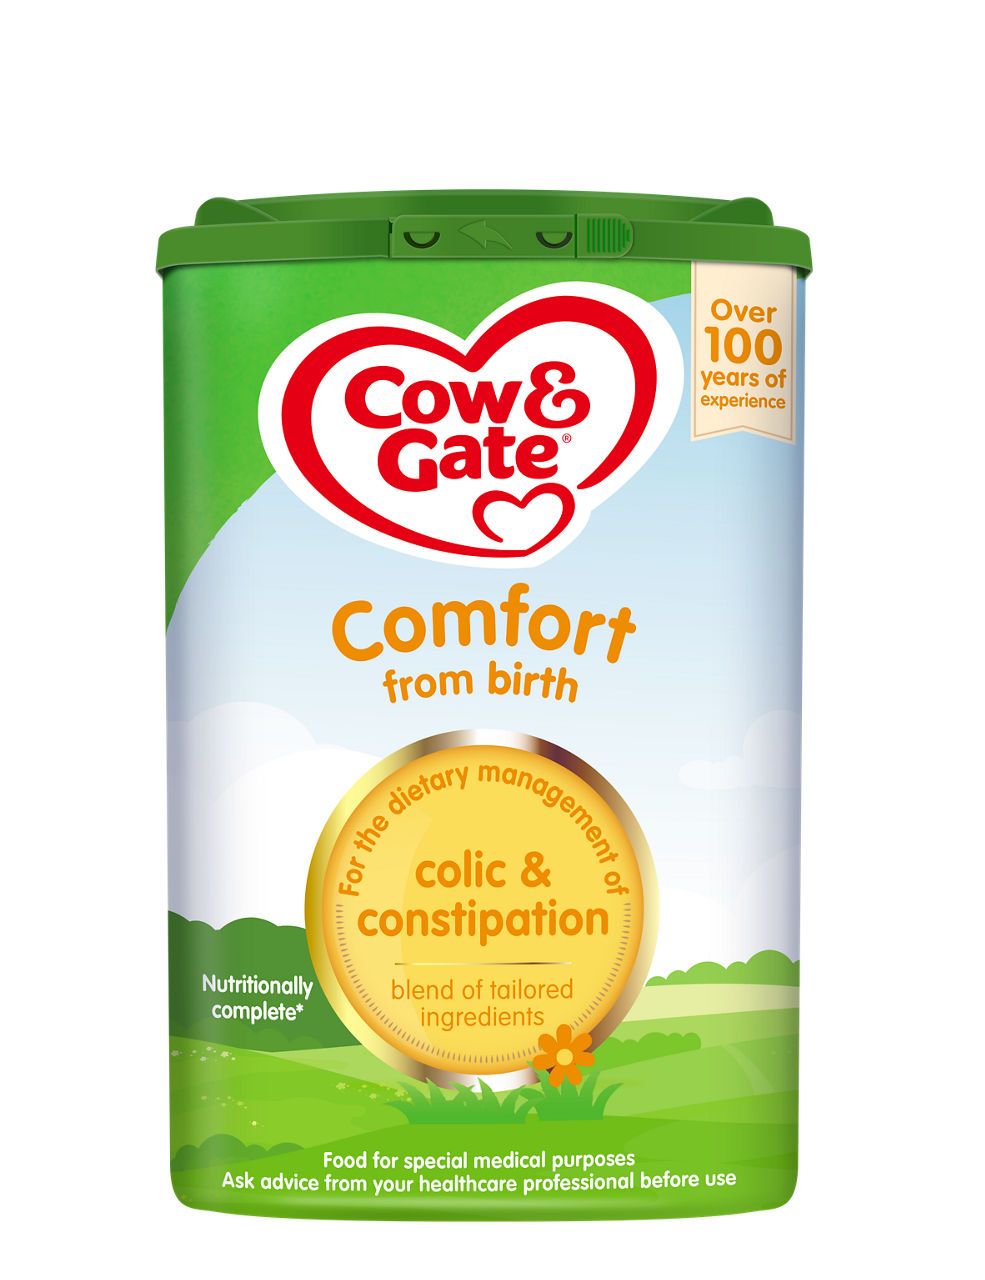 Cow & Gate Comfort (Powder) 800g EaZypack